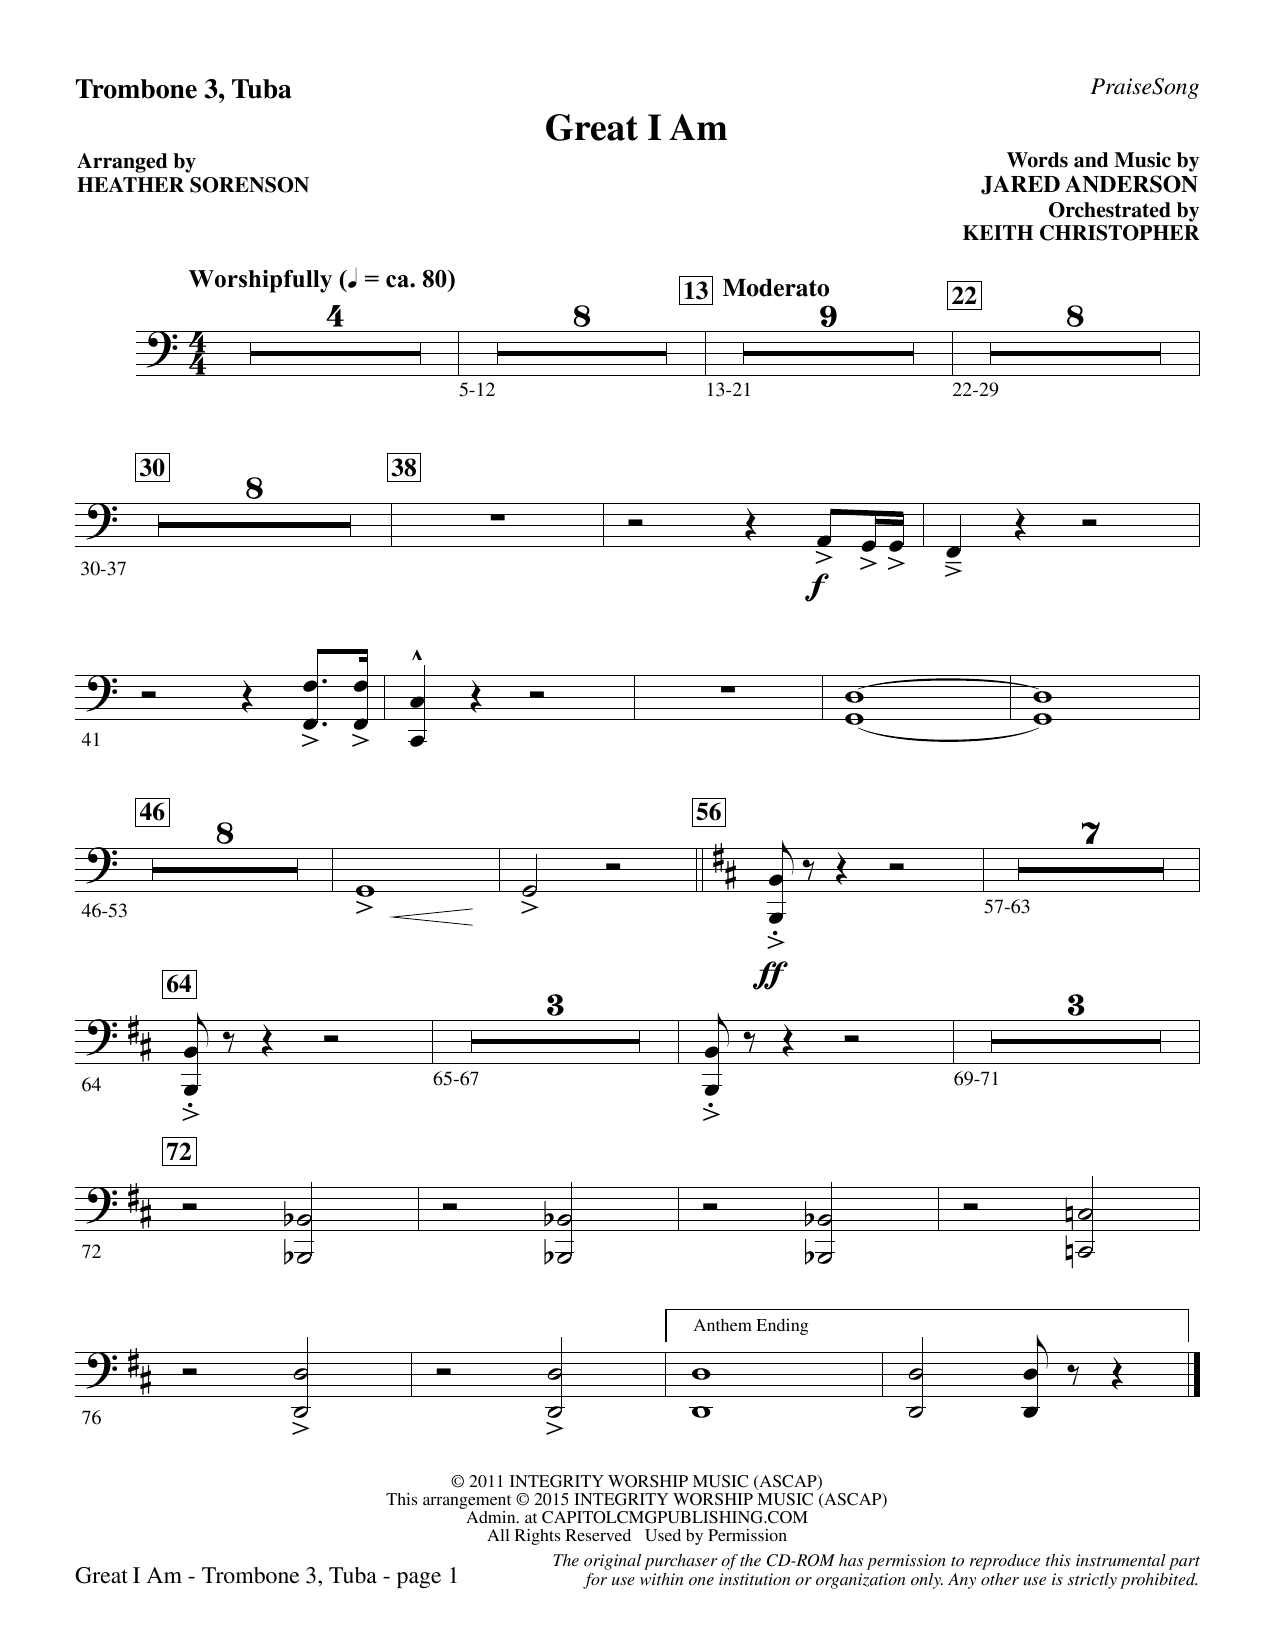 Heather Sorenson Great I Am - Trombone 3/Tuba sheet music notes and chords. Download Printable PDF.